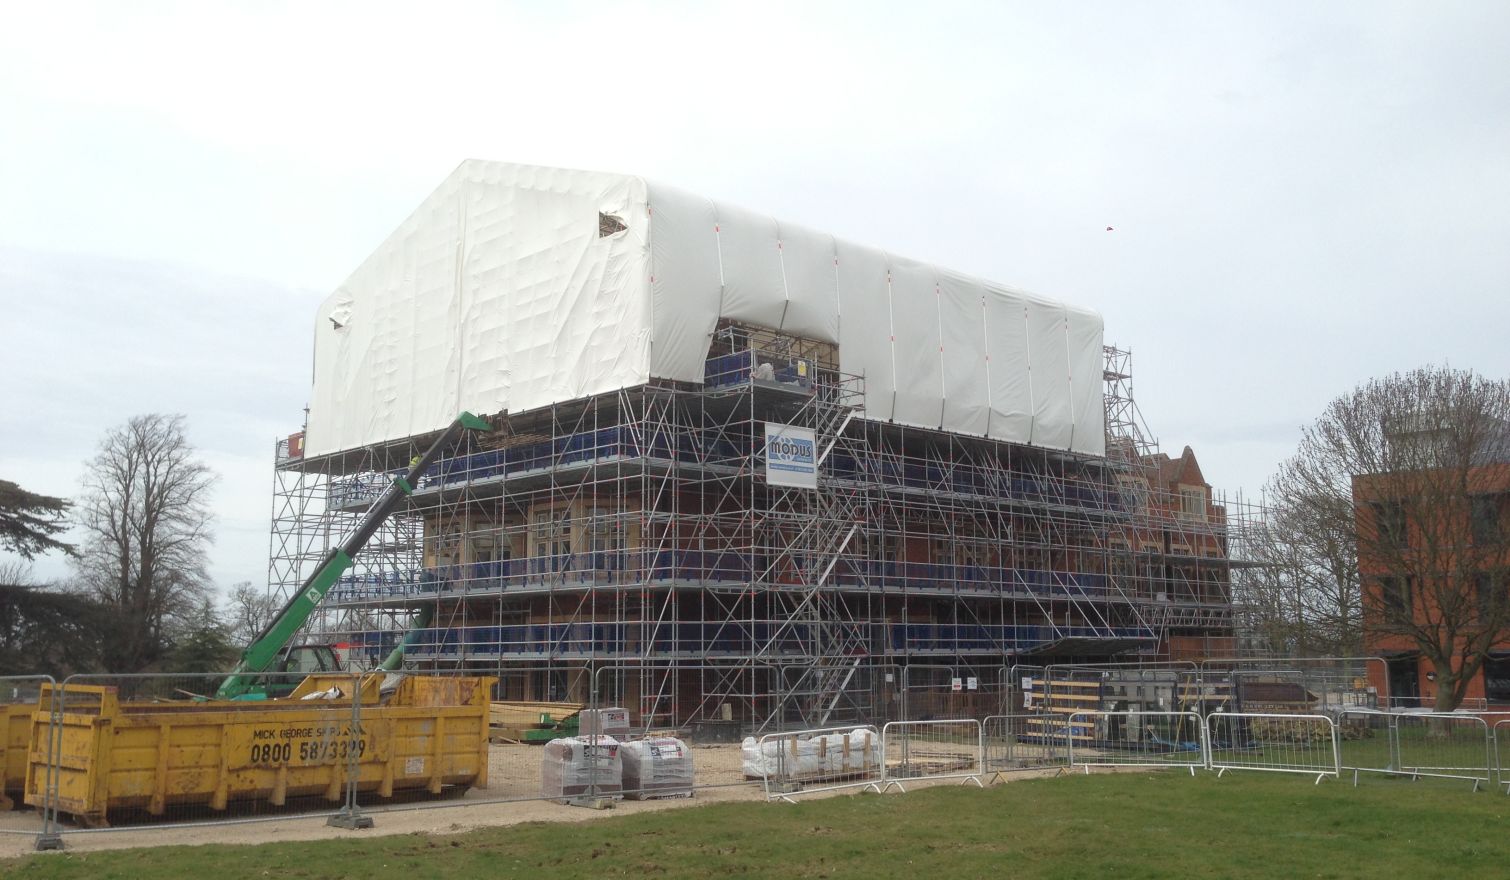 Tempsford Hall - Layher Keder XL Rolling Roof and Allround Access Scaffold